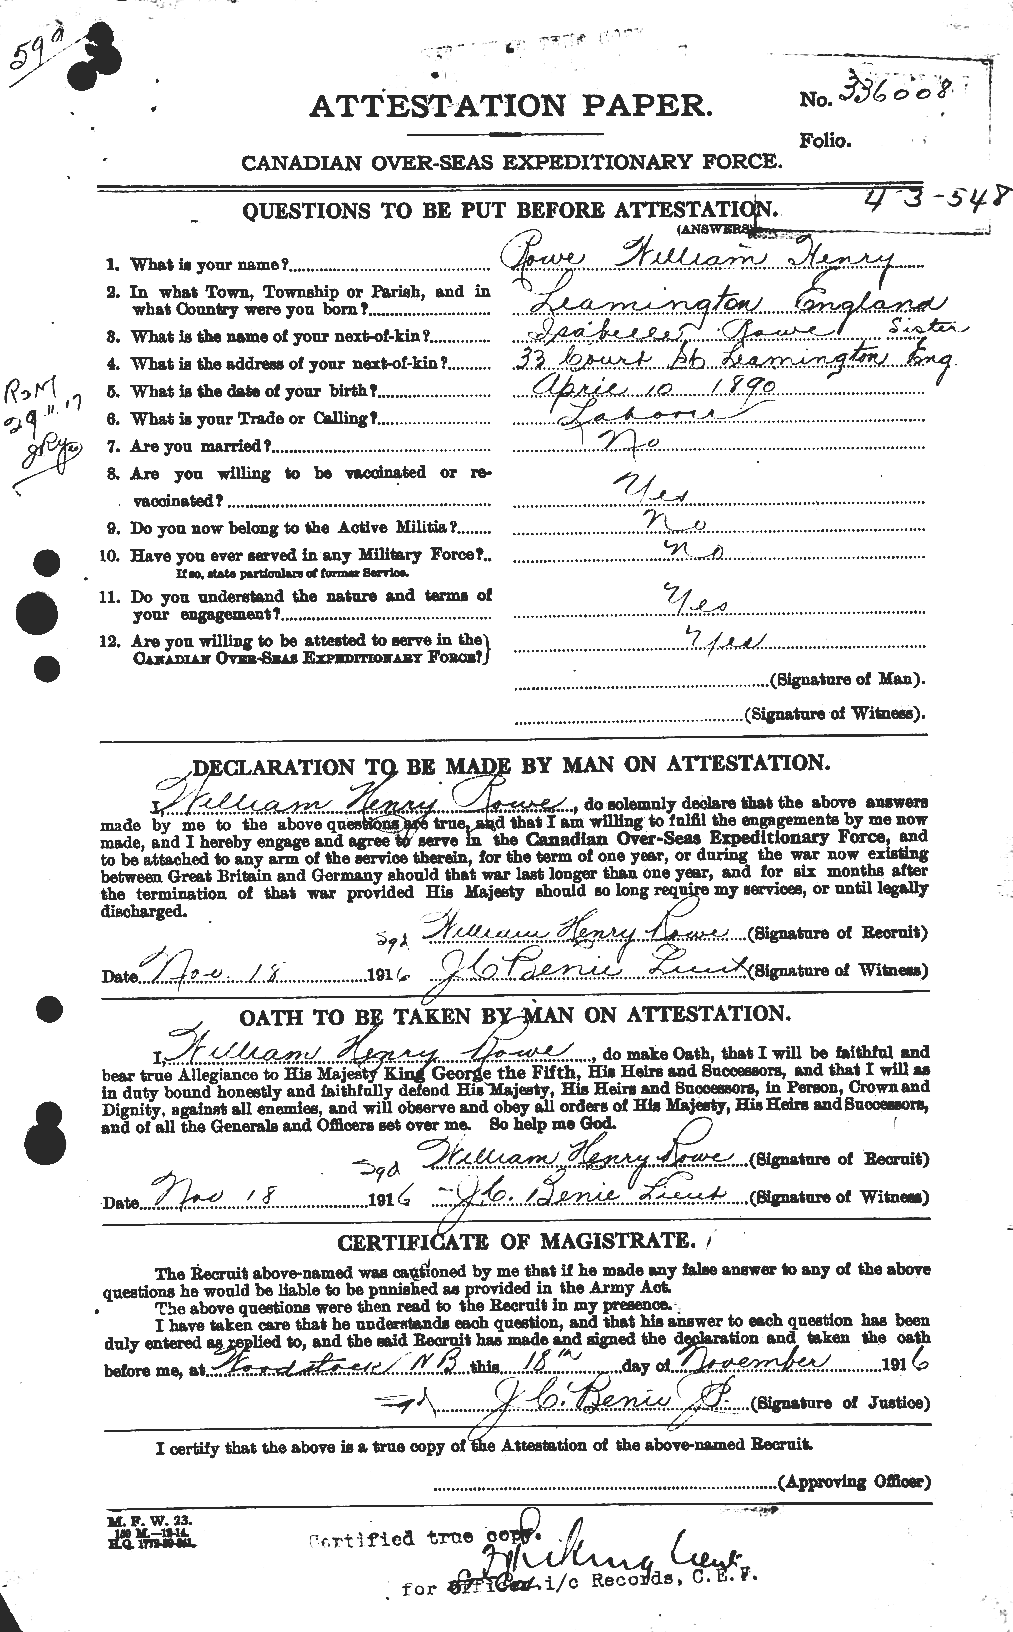 Personnel Records of the First World War - CEF 616028a